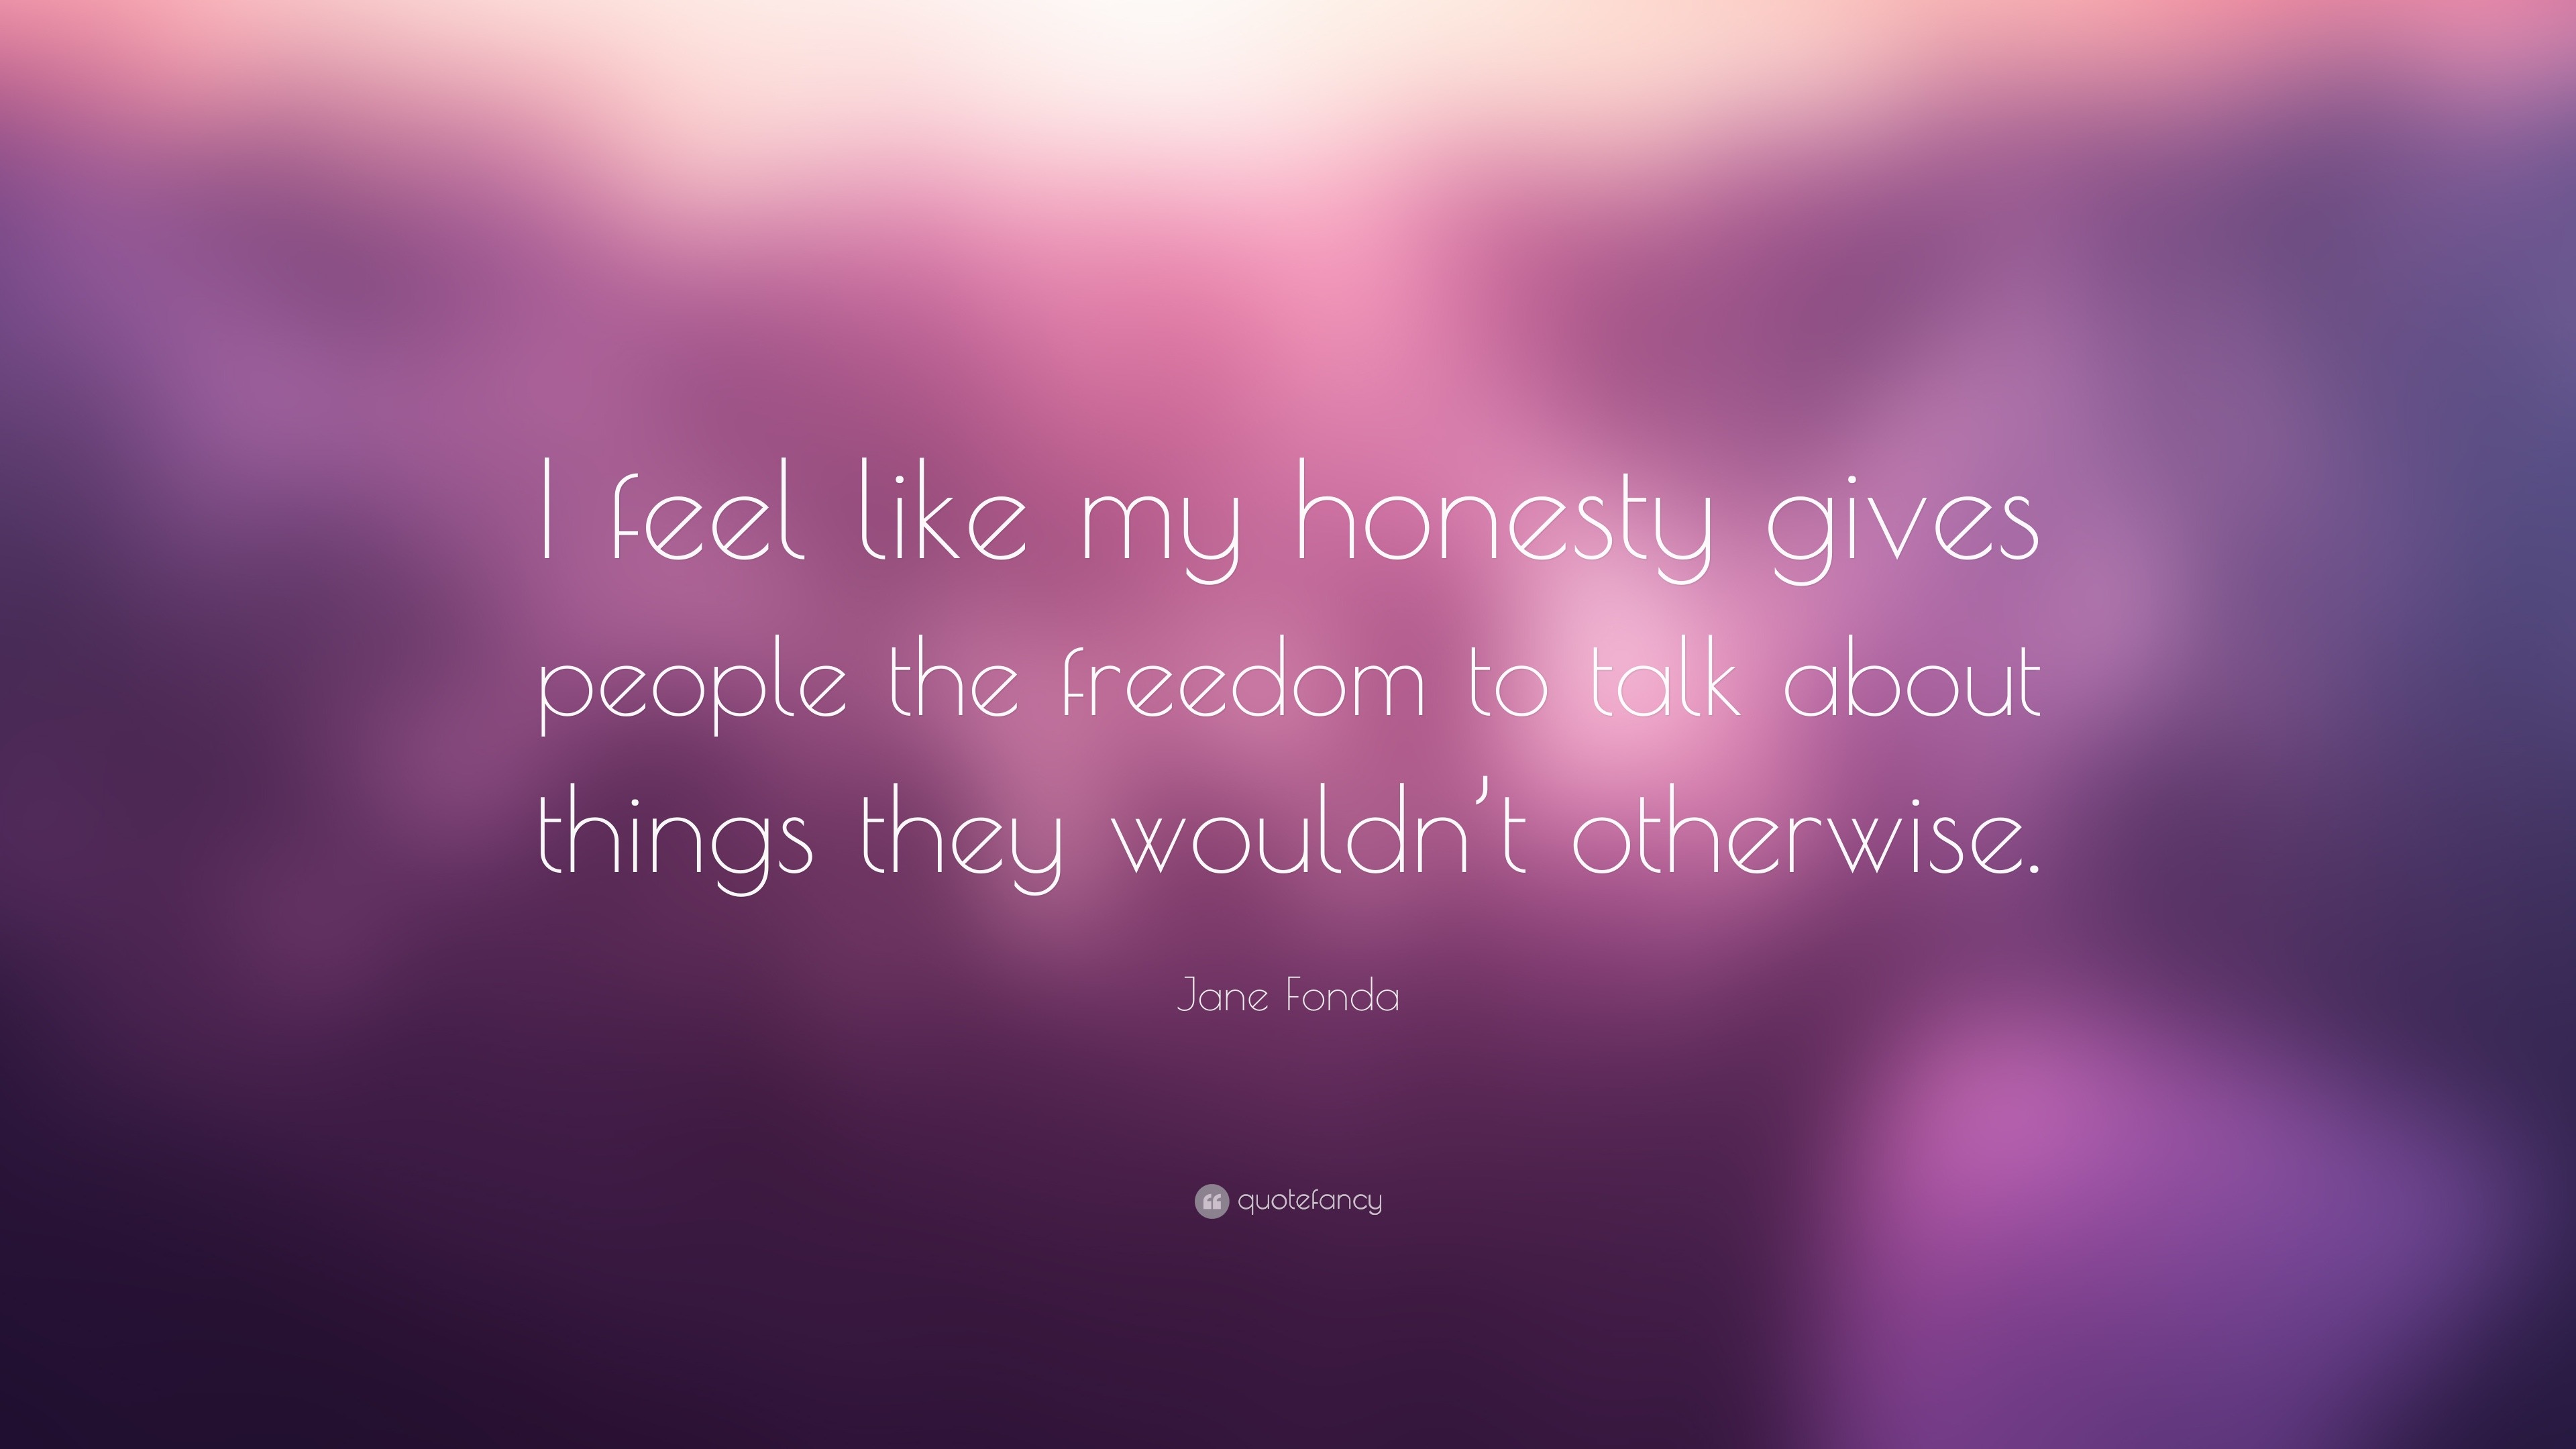 Jane Fonda Quote: “I feel like my honesty gives people the freedom to ...